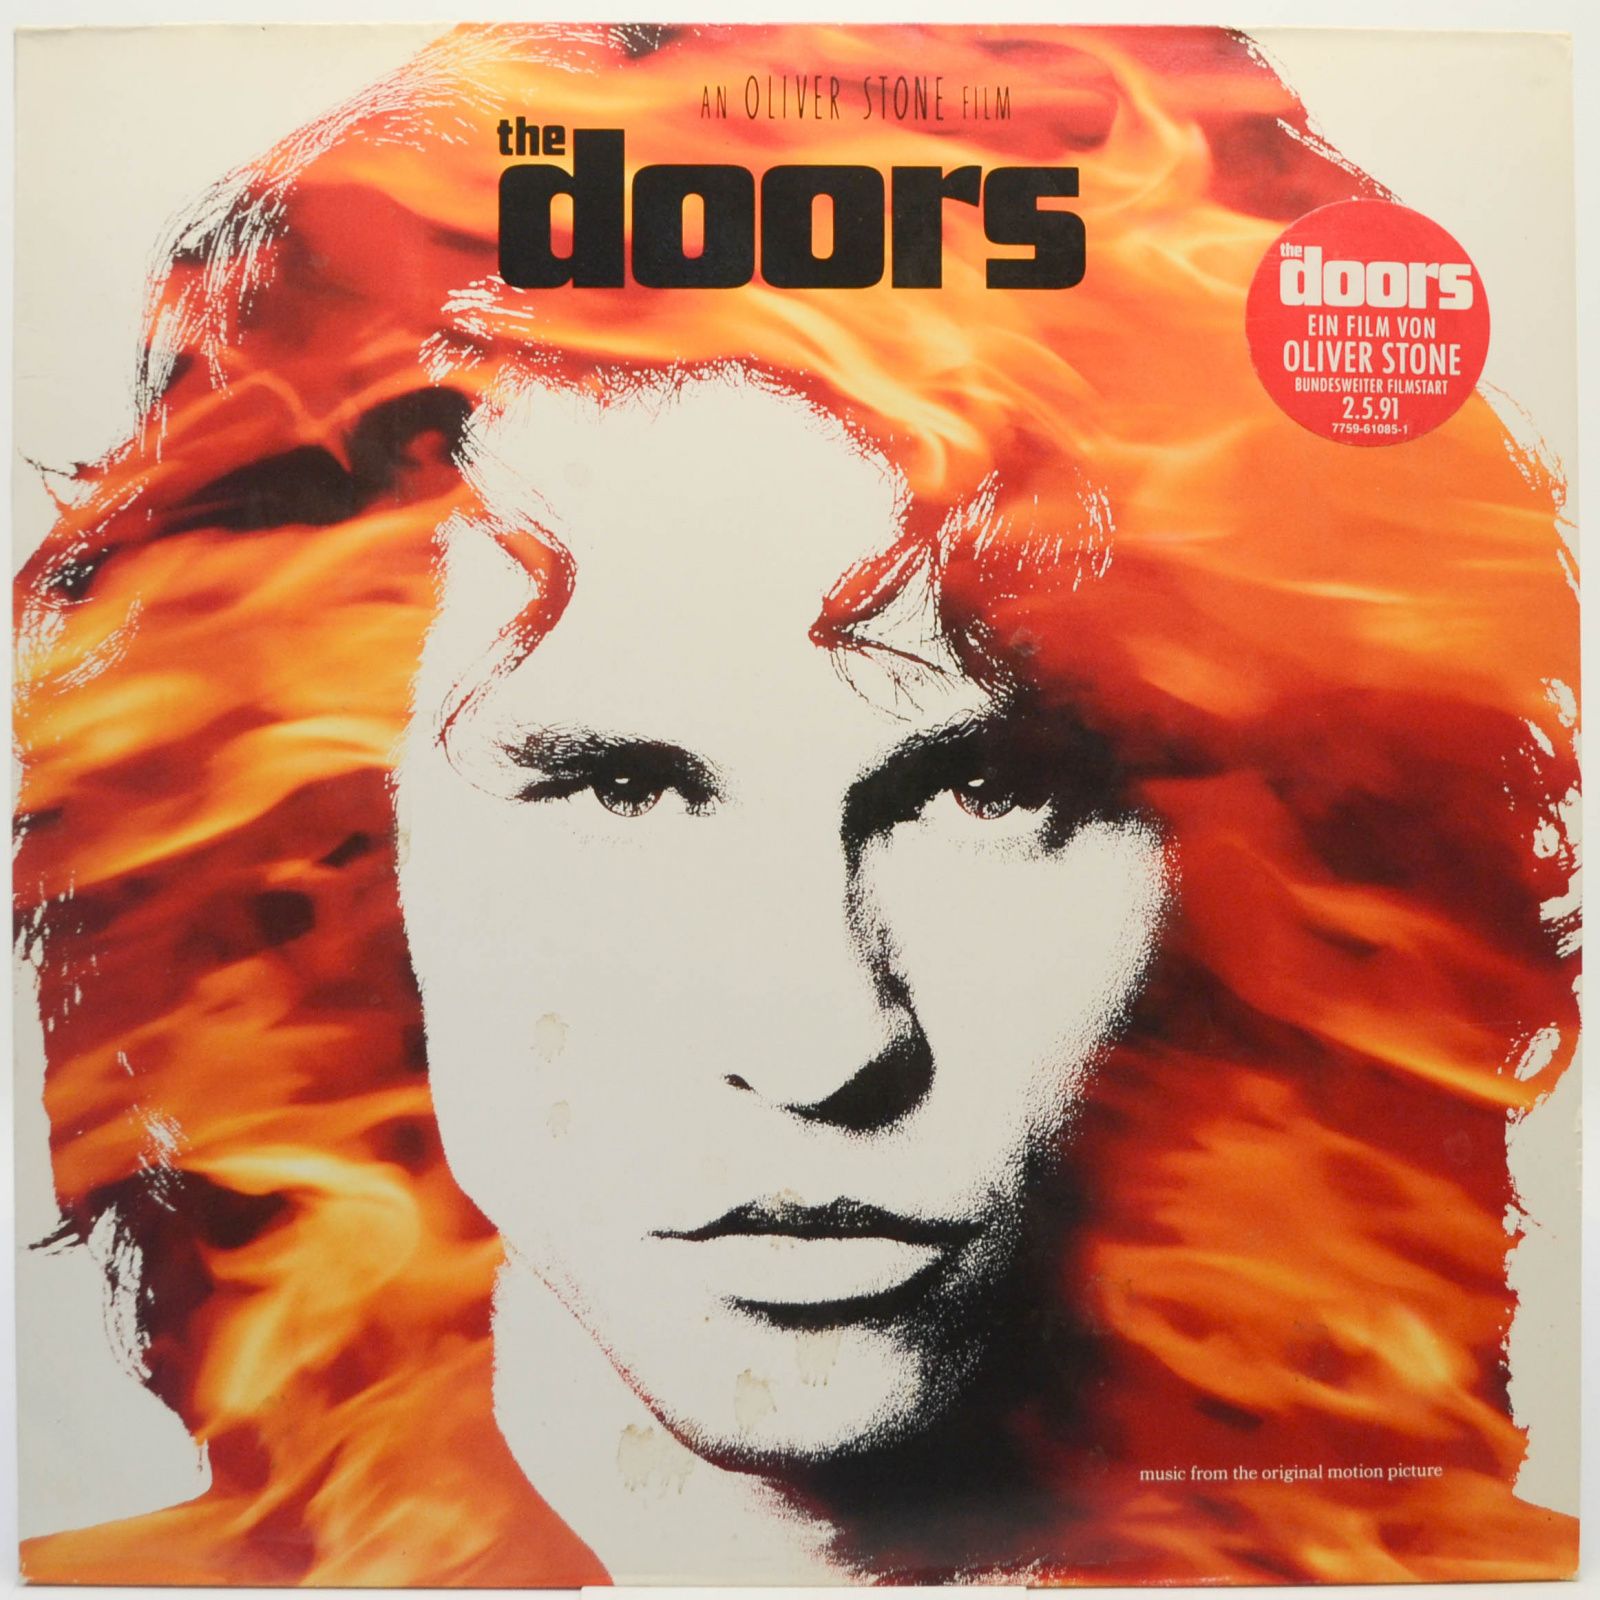 Doors — The Doors (Music From The Original Motion Picture), 1991